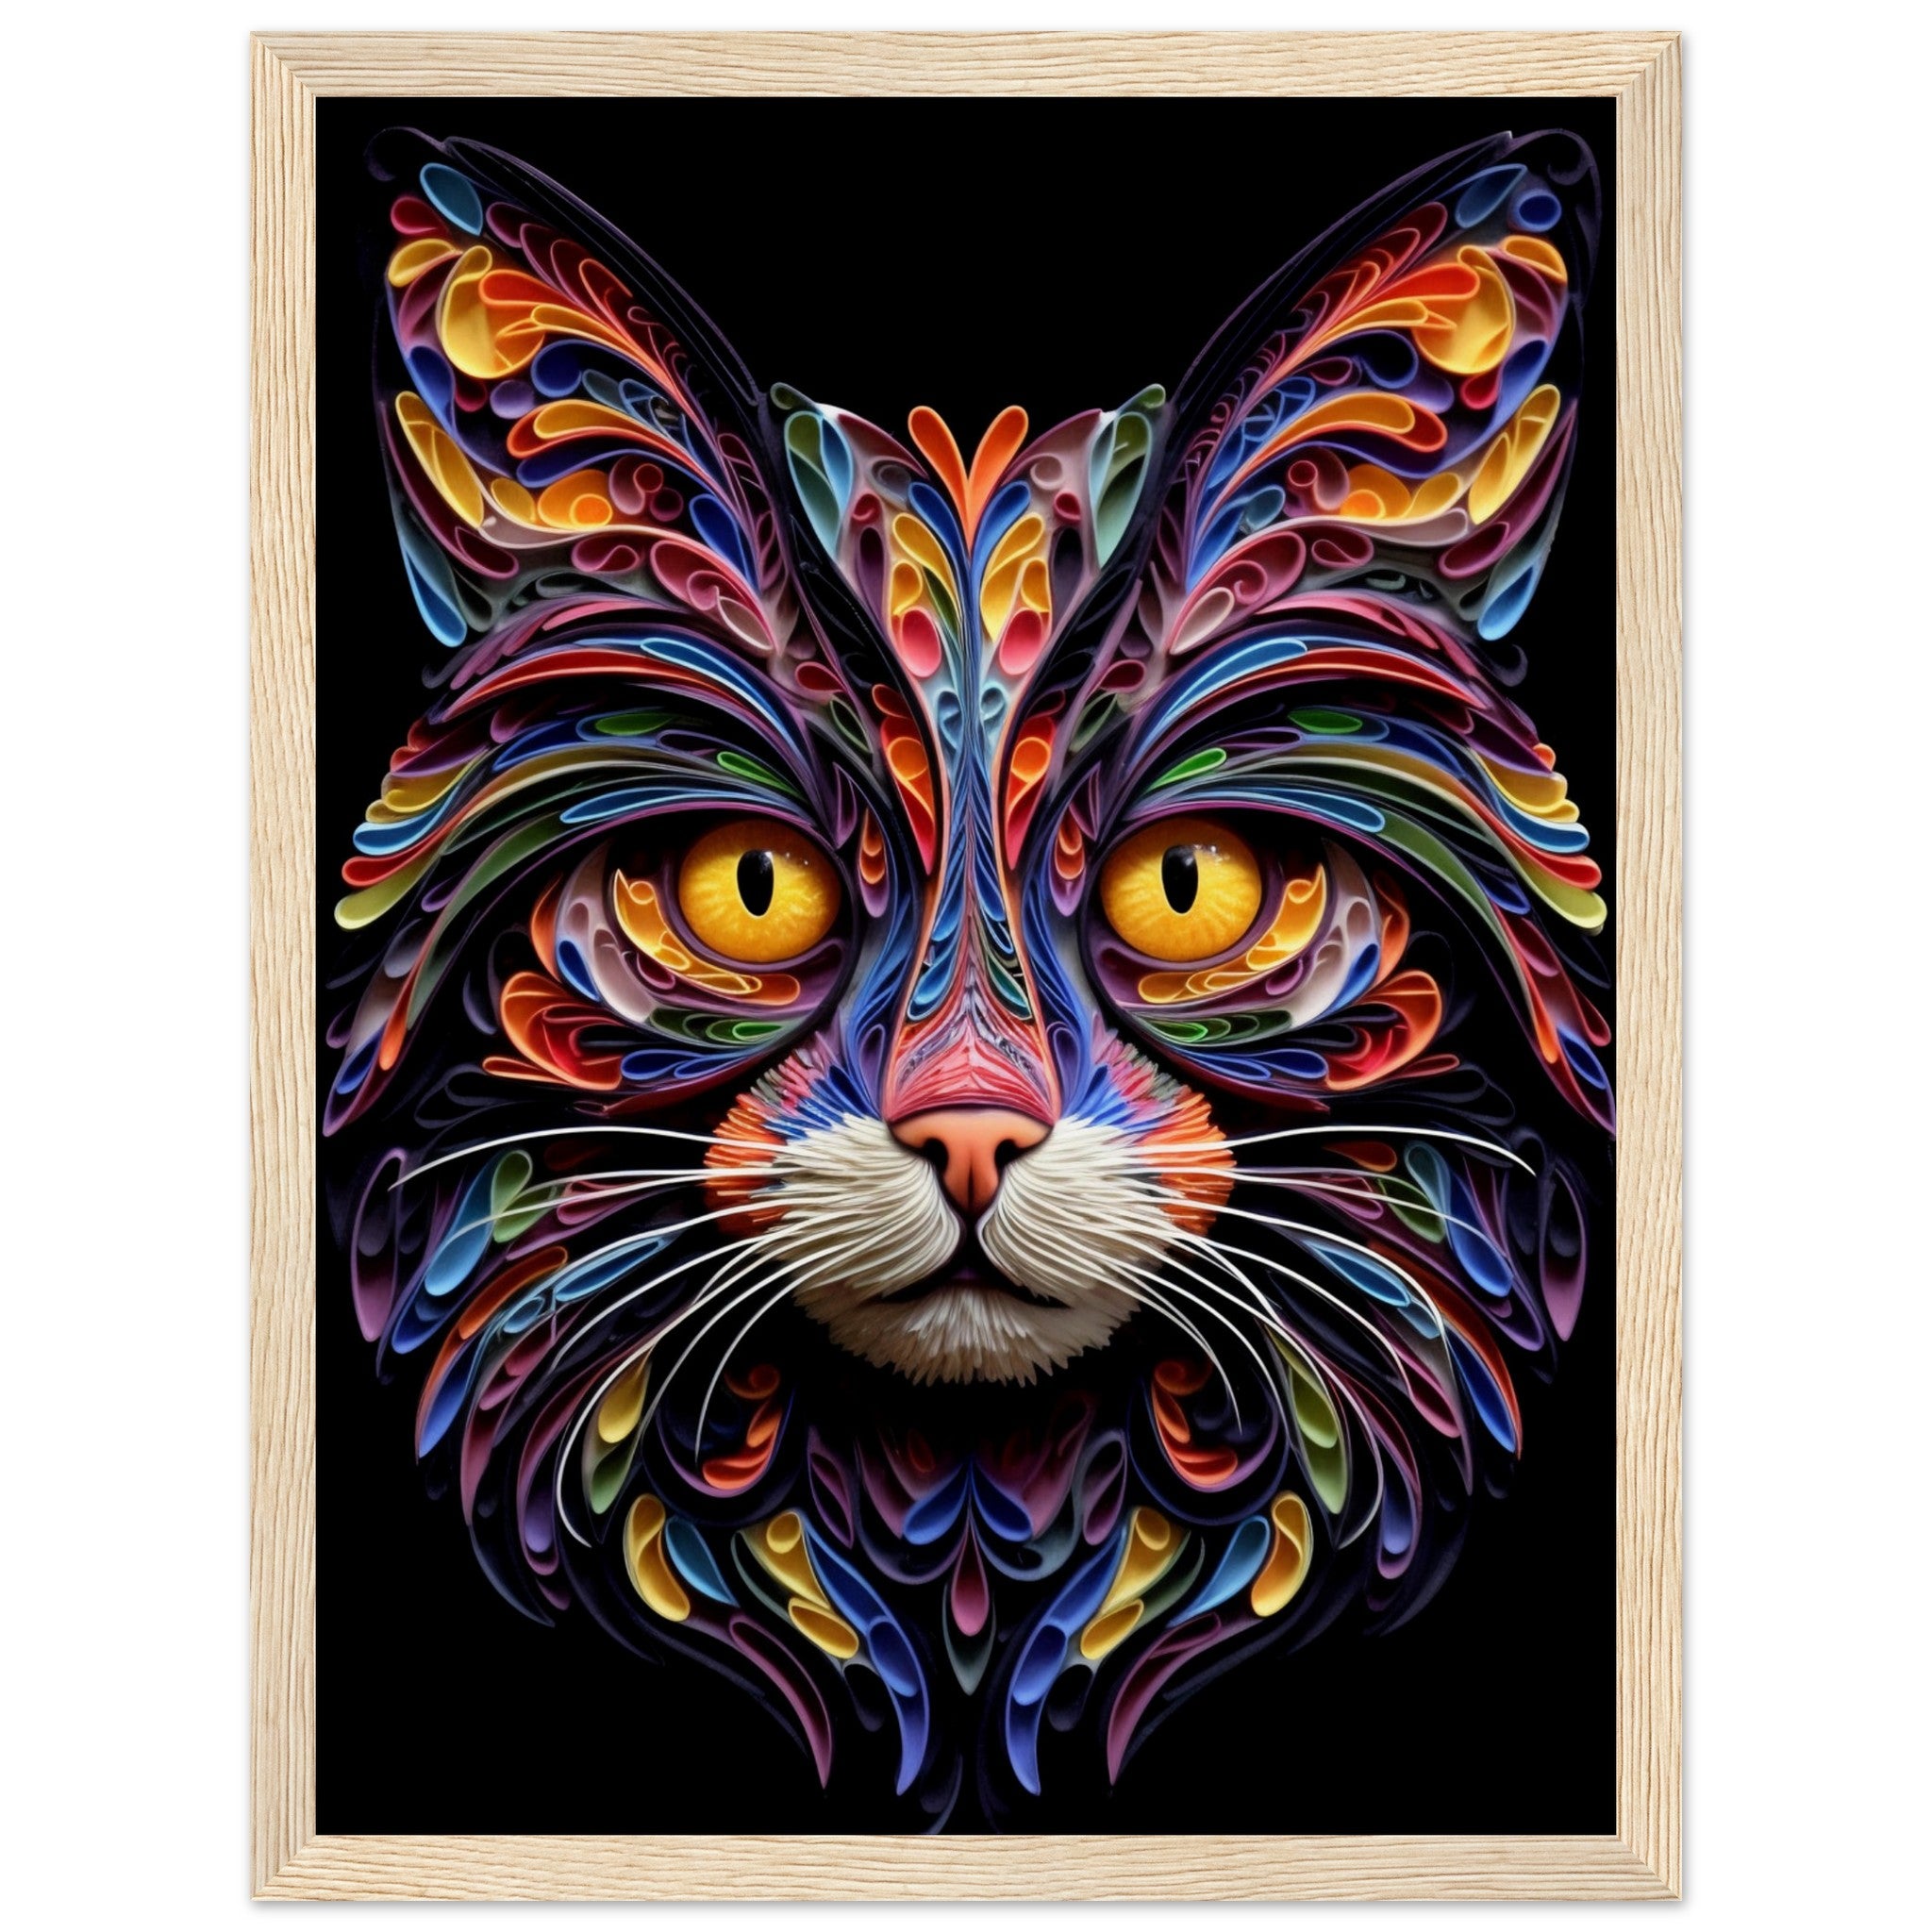 Geometric Cat face - immersiarts